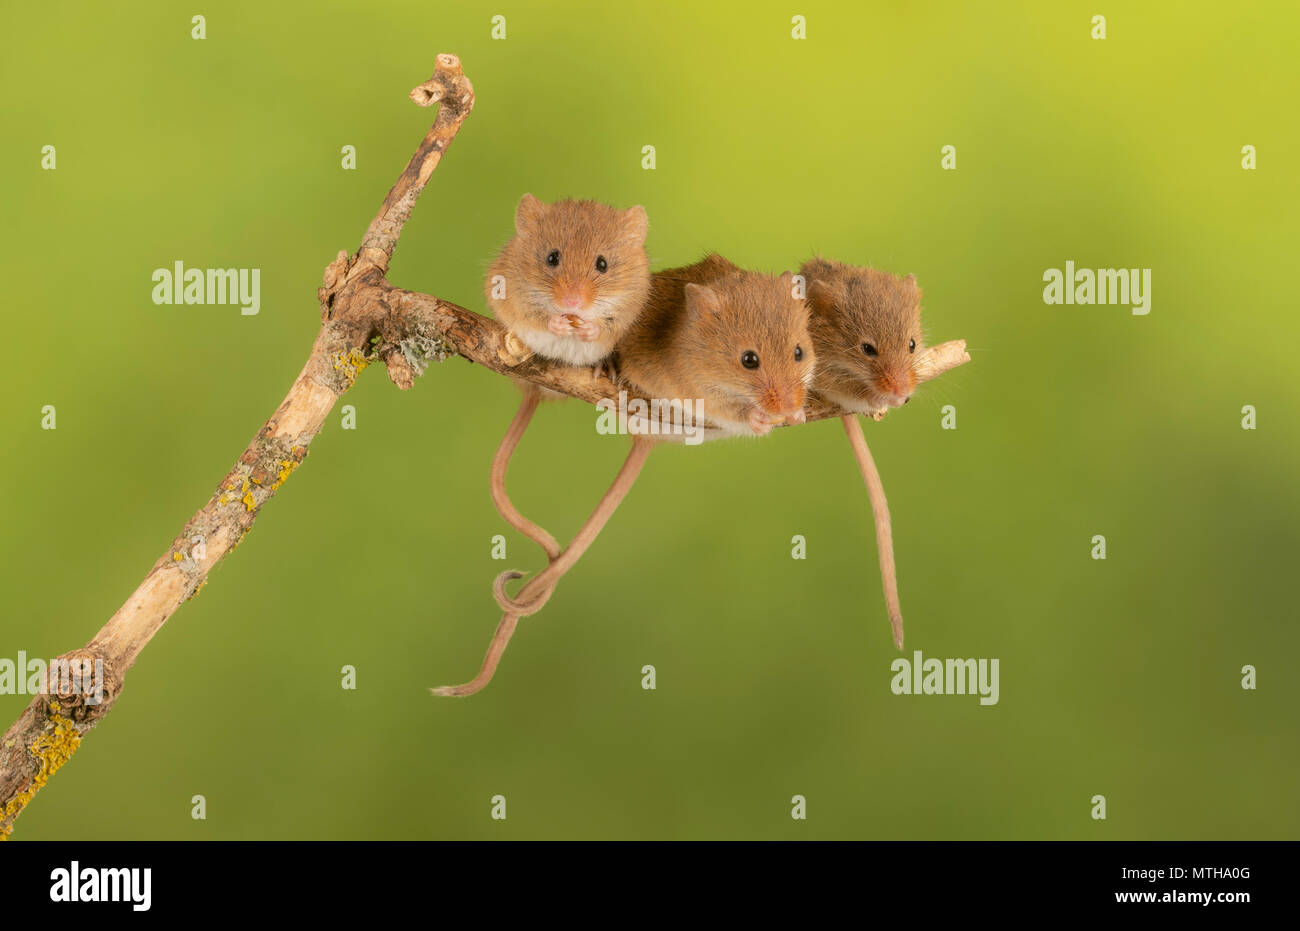 Trio of cure harvest mice sitting on a branch Stock Photo